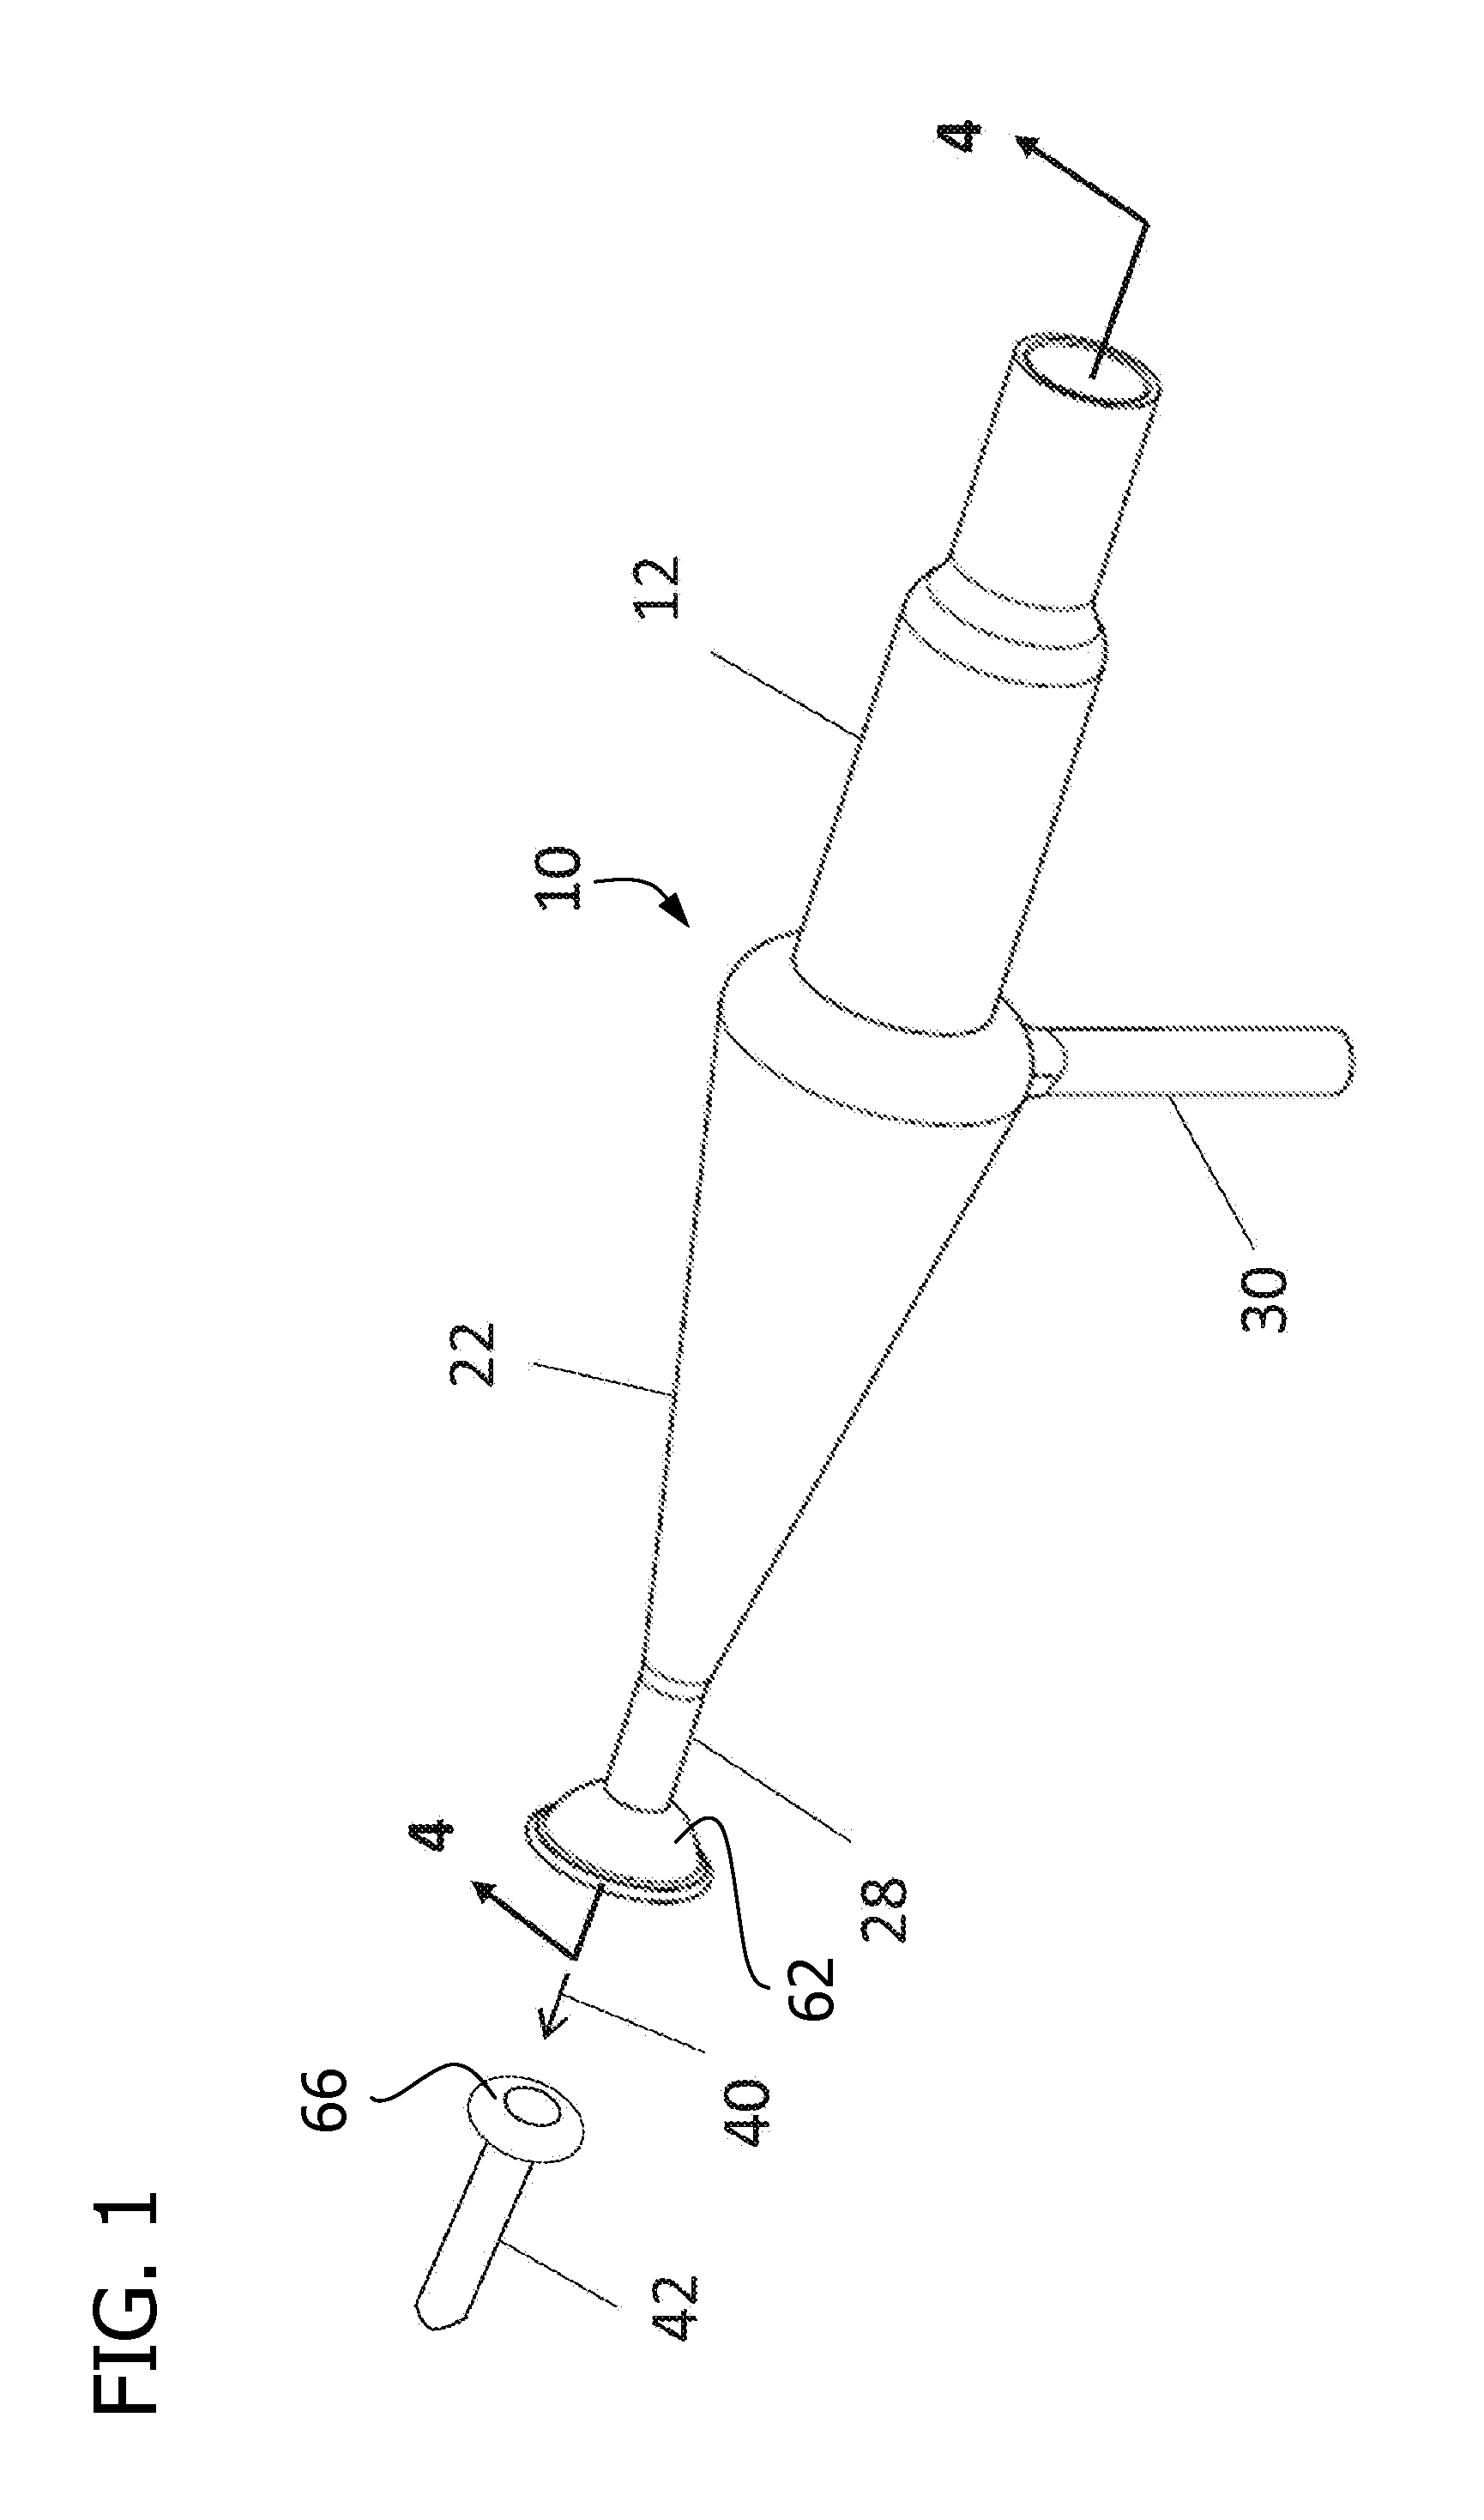 Sample Transferring Apparatus for Mass Cytometry